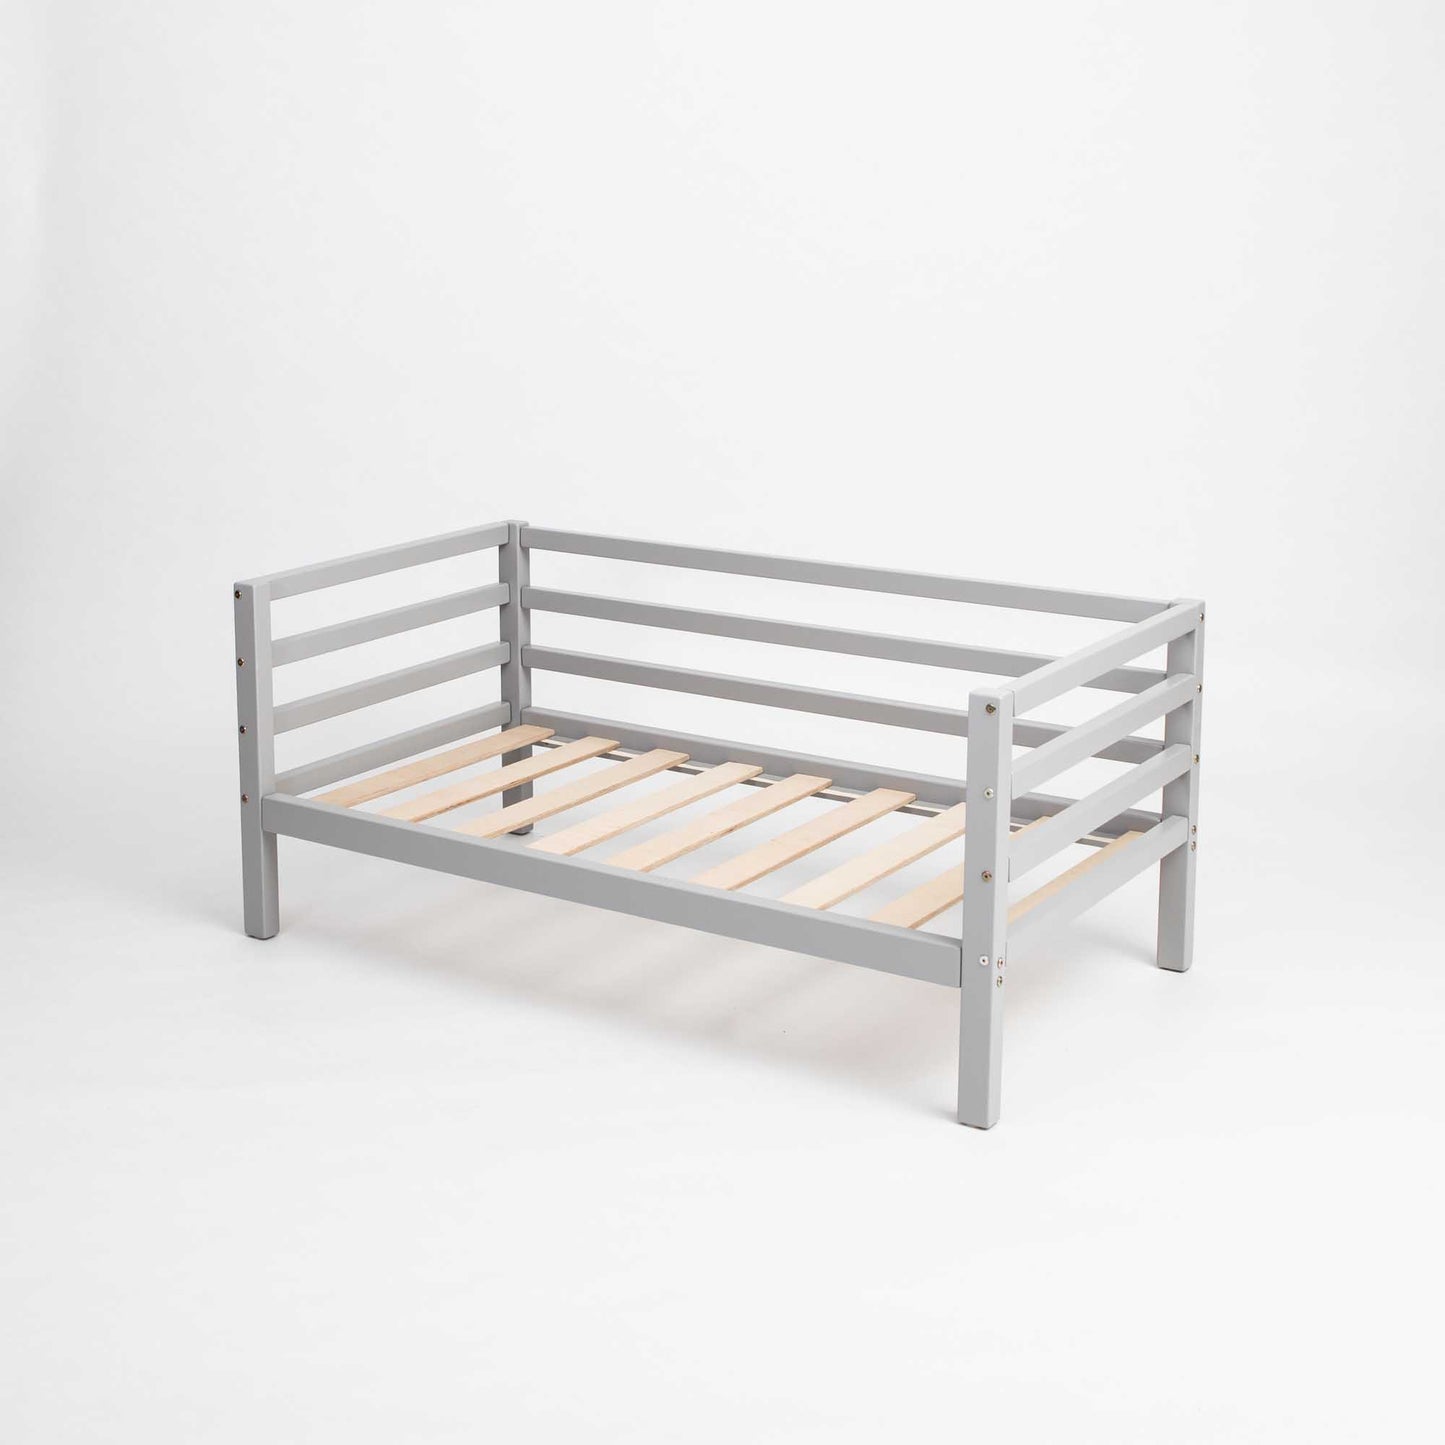 A Sweet Home From Wood Kids' bed on legs with a 3-sided horizontal rail against a white background.